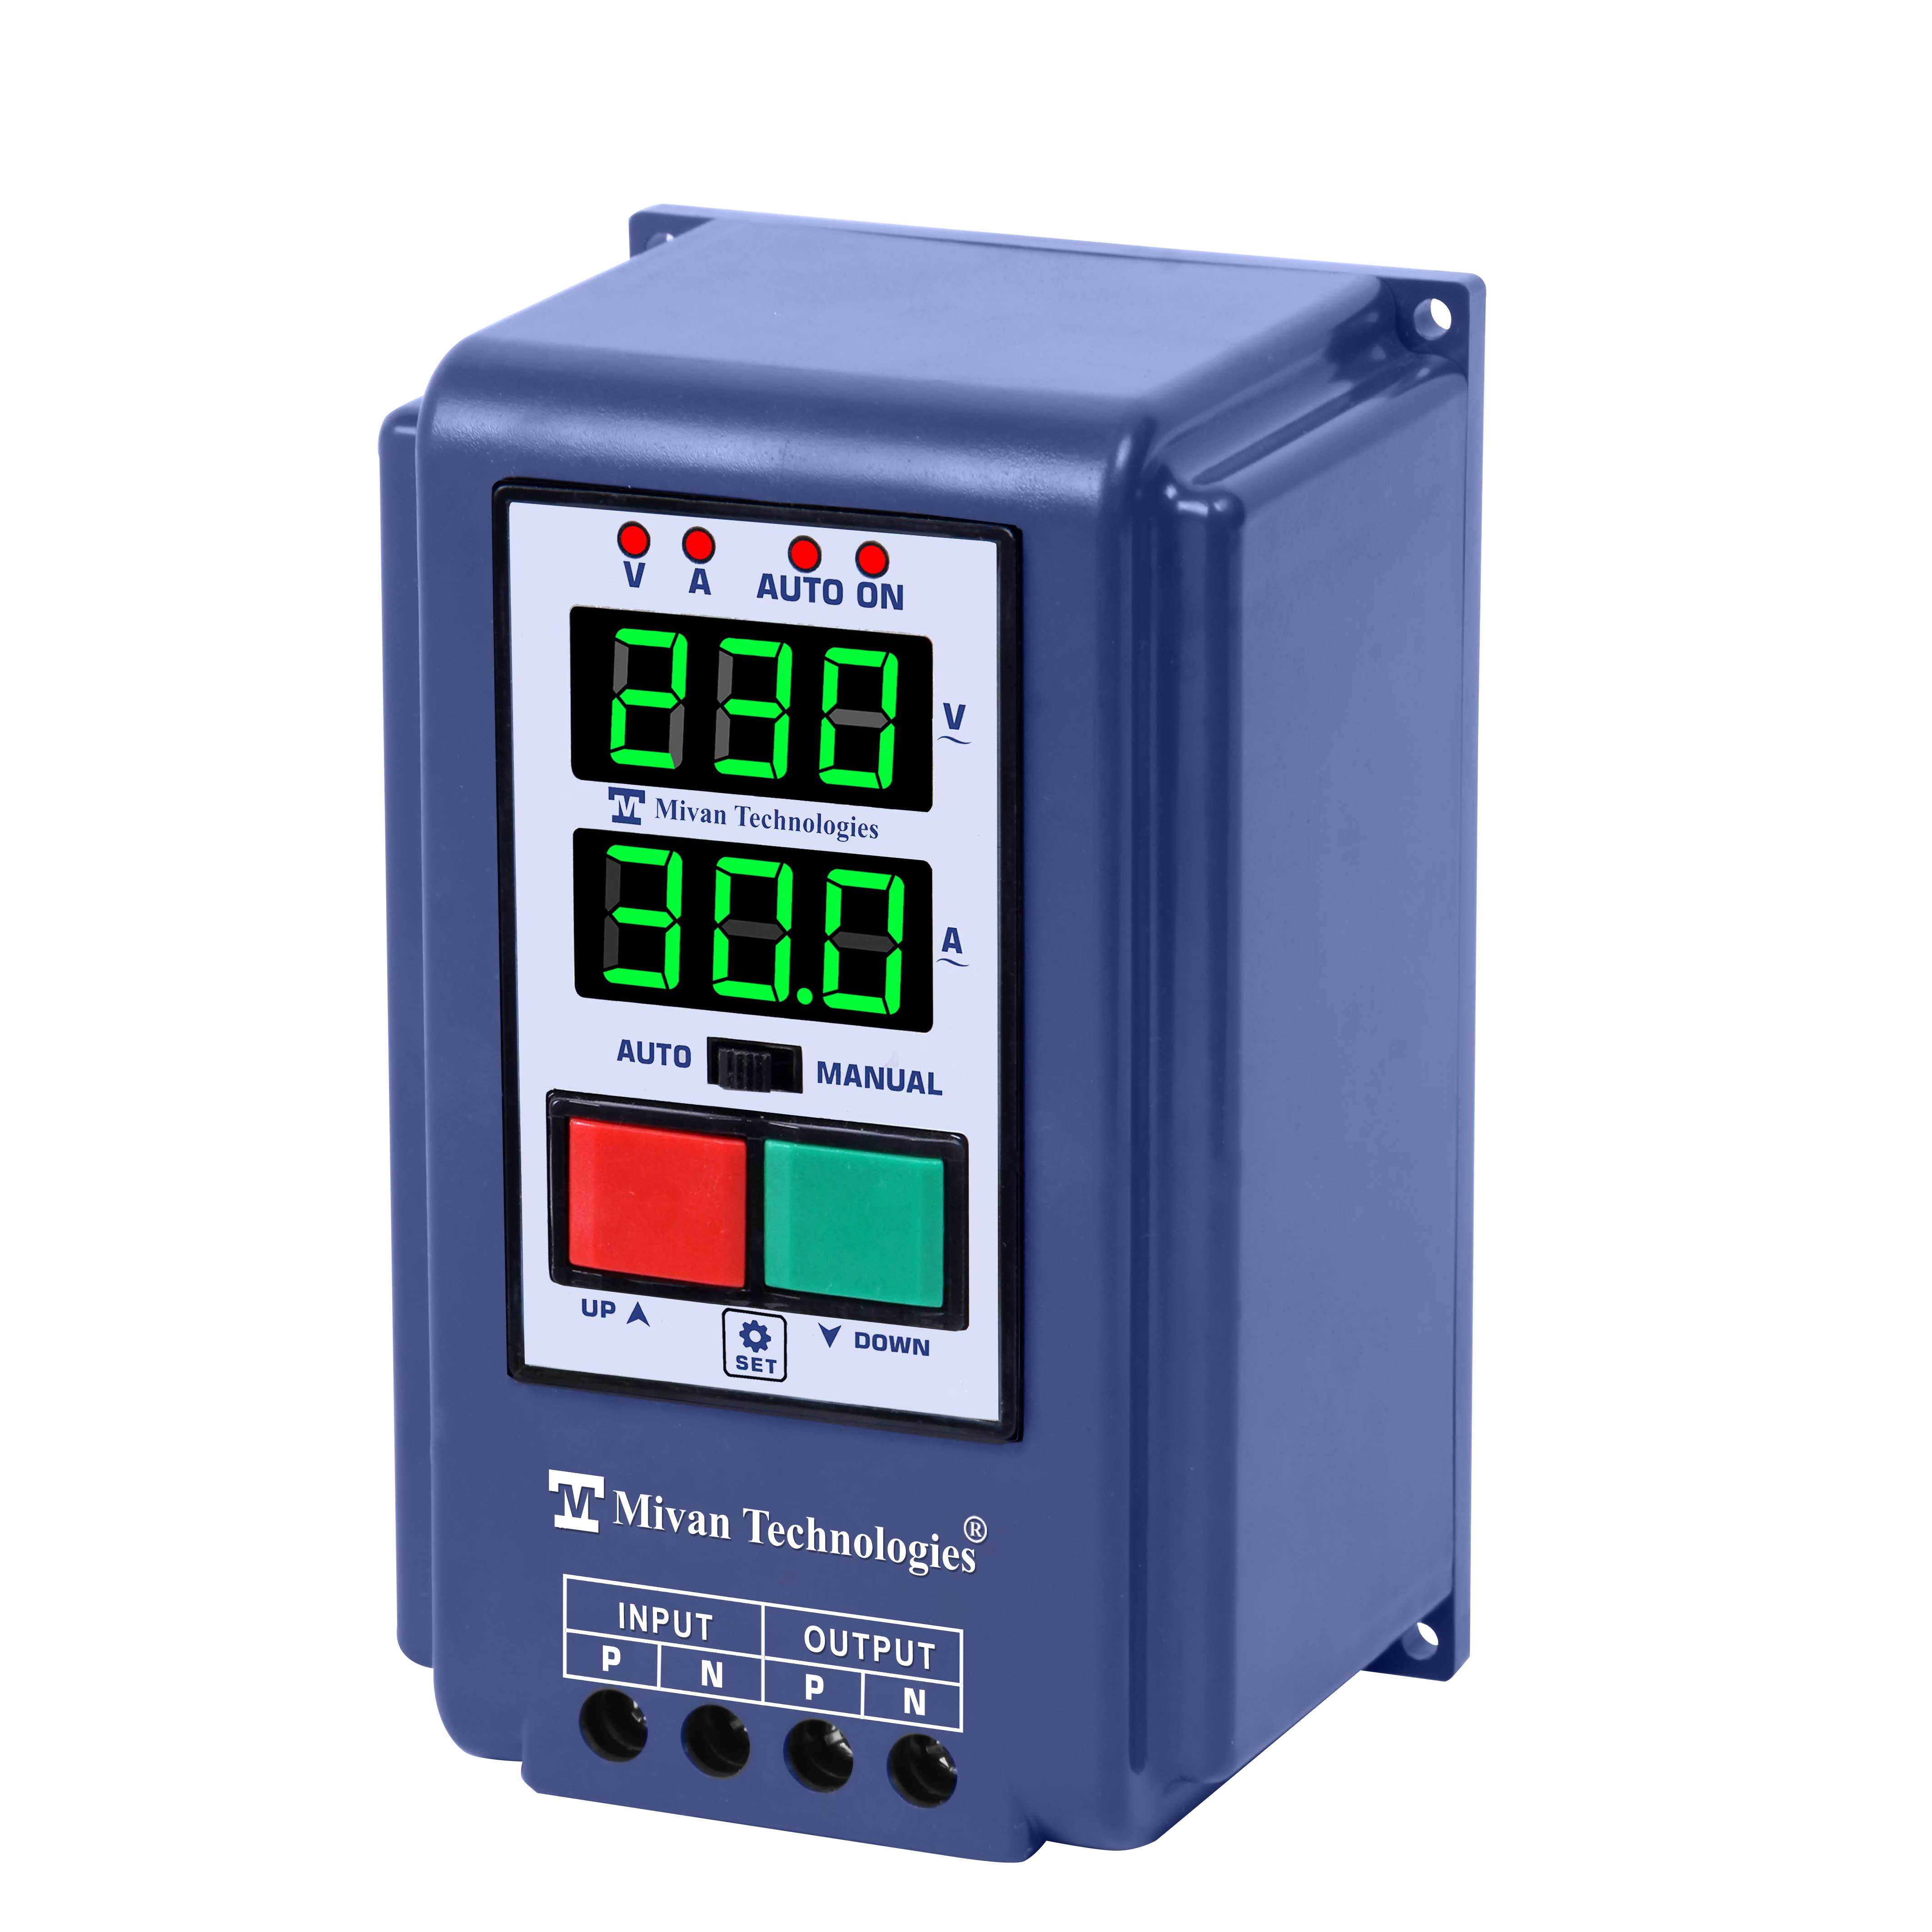 HD Single Phase Digital dry run protection relay with HV LV OL and dry run protection cyclic timer suitable for all single phase appliances Suitable up to 3 hp motor DS